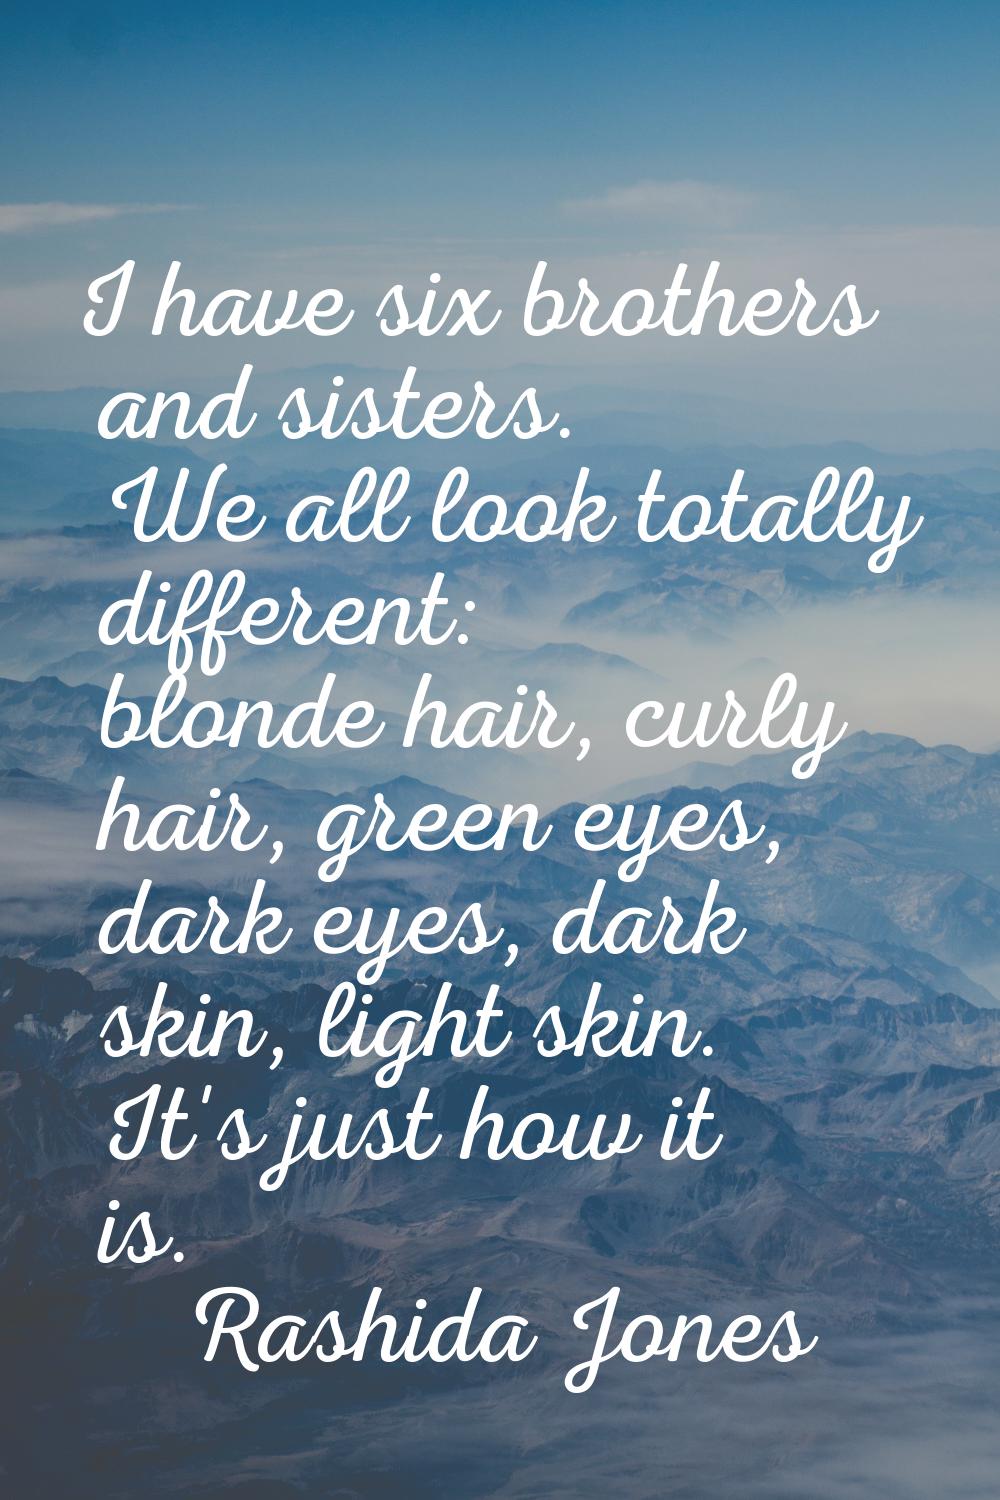 I have six brothers and sisters. We all look totally different: blonde hair, curly hair, green eyes